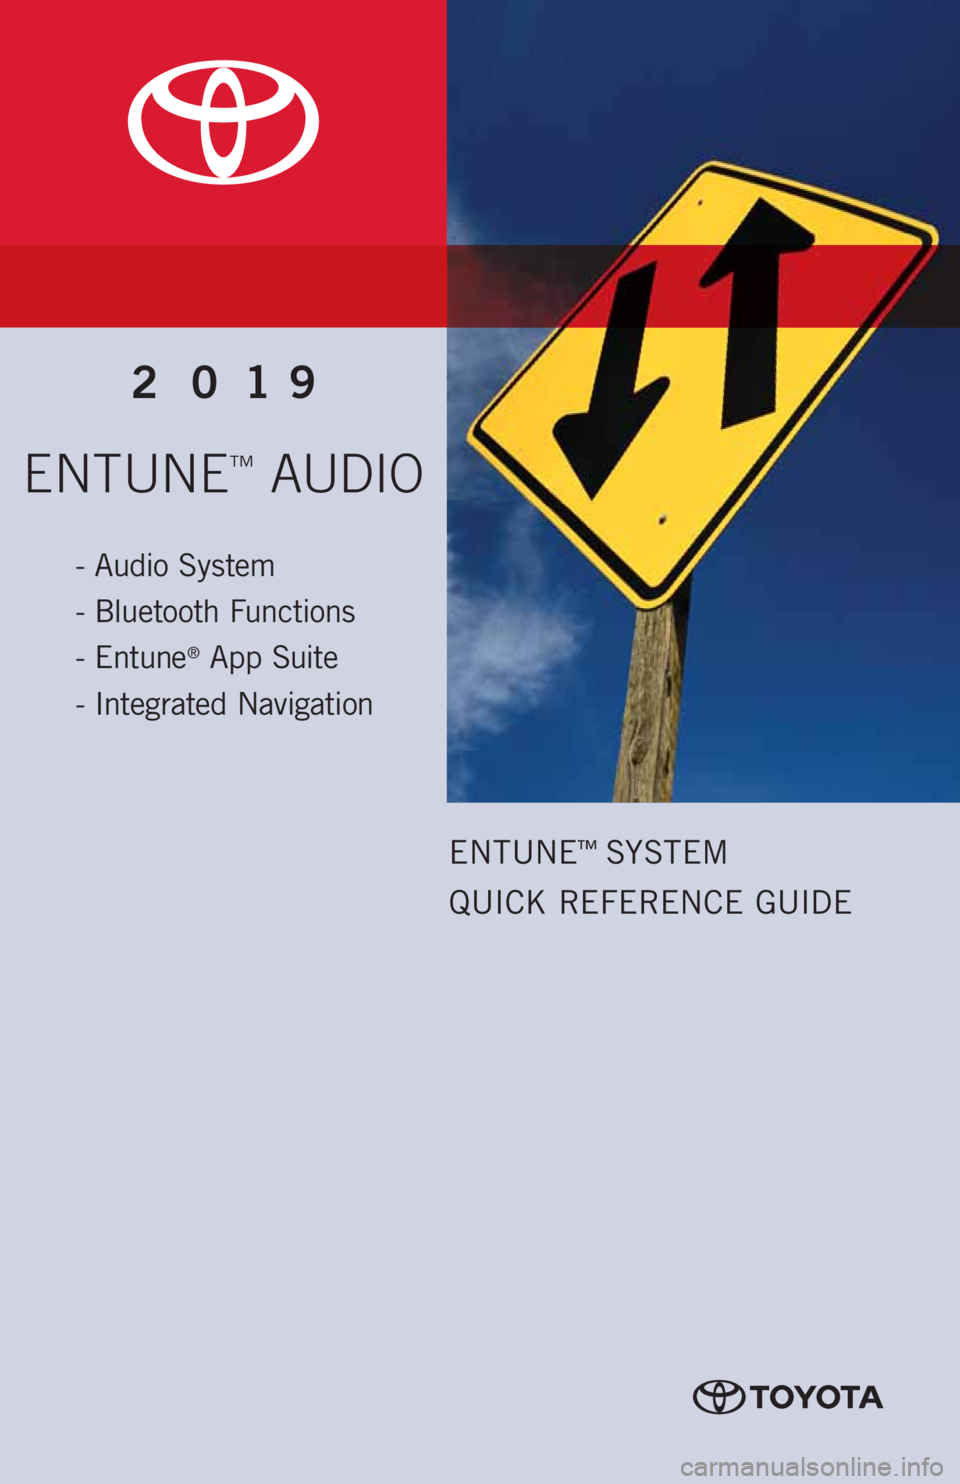 TOYOTA PRIUS C 2019  Accessories, Audio & Navigation (in English) ENTUNE™ AUDIO
2019
- Audio System
- Bluetooth Functions
- Entune
® App Suite
- Integrated Navigation
ENTUNE™ SYSTEM   
QUICK REFERENCE GUIDE 